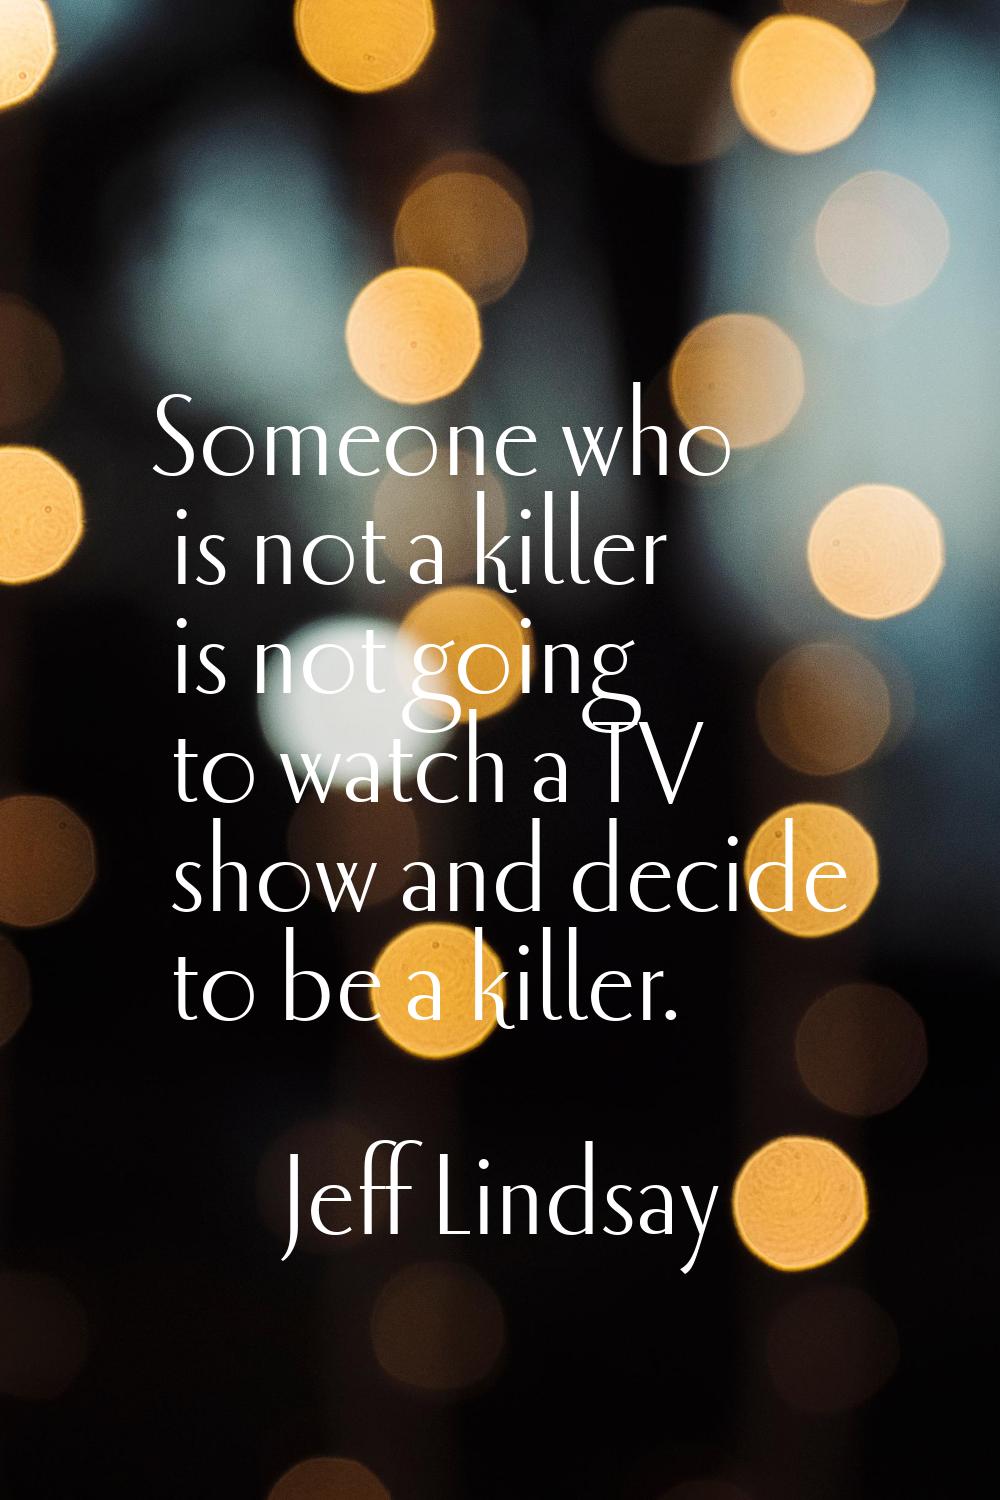 Someone who is not a killer is not going to watch a TV show and decide to be a killer.